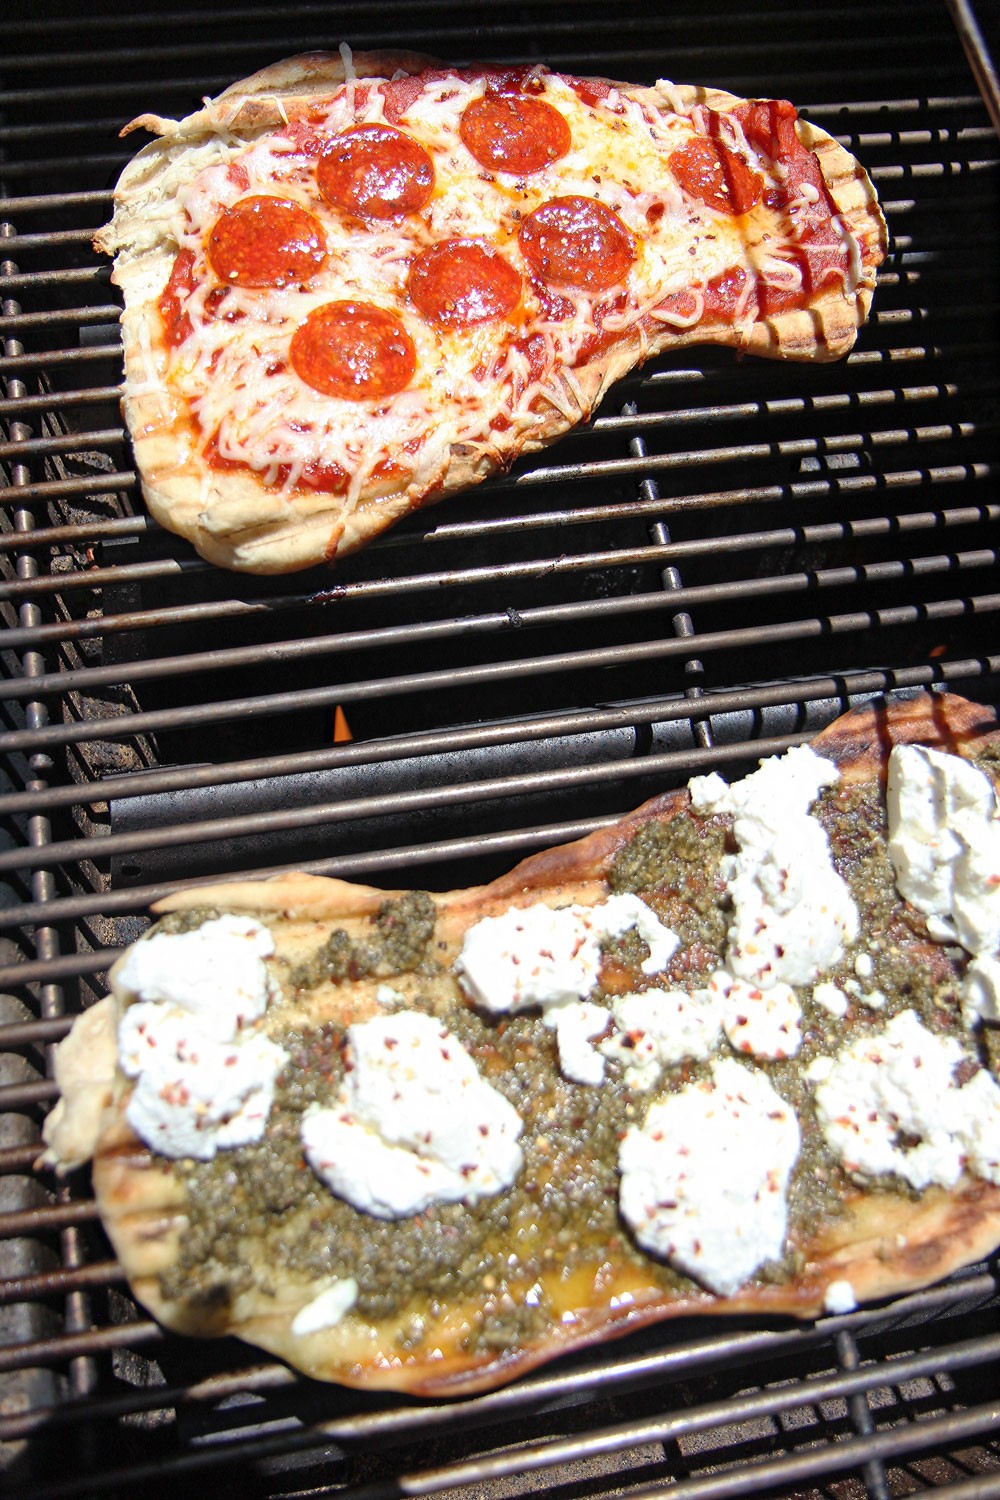 Pizza on the Grill Recipe